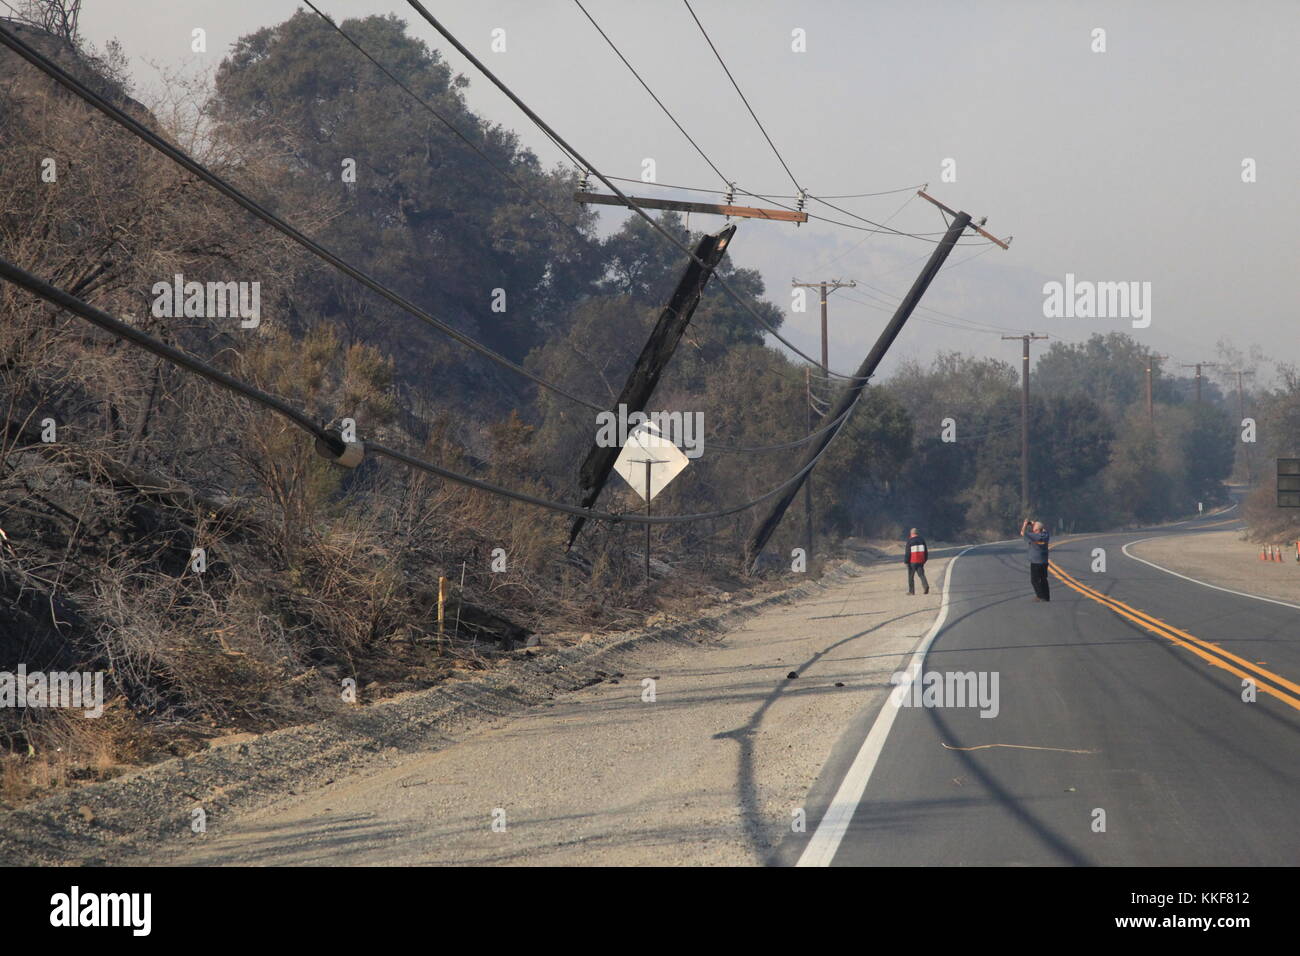 California, USA. 5th Dec, 2017. Damaged poles are seen in Ventura County of California, the United States, Dec. 5, 2017. Brush fires across the region were fed by extremely high winds, low humidities and dry fuel. Hundreds of fire fighters have been working very hard to minimize damage to property and evacuations are taking place in many places in south California, said authorities. Credit: Huang Heng/Xinhua/Alamy Live News Stock Photo